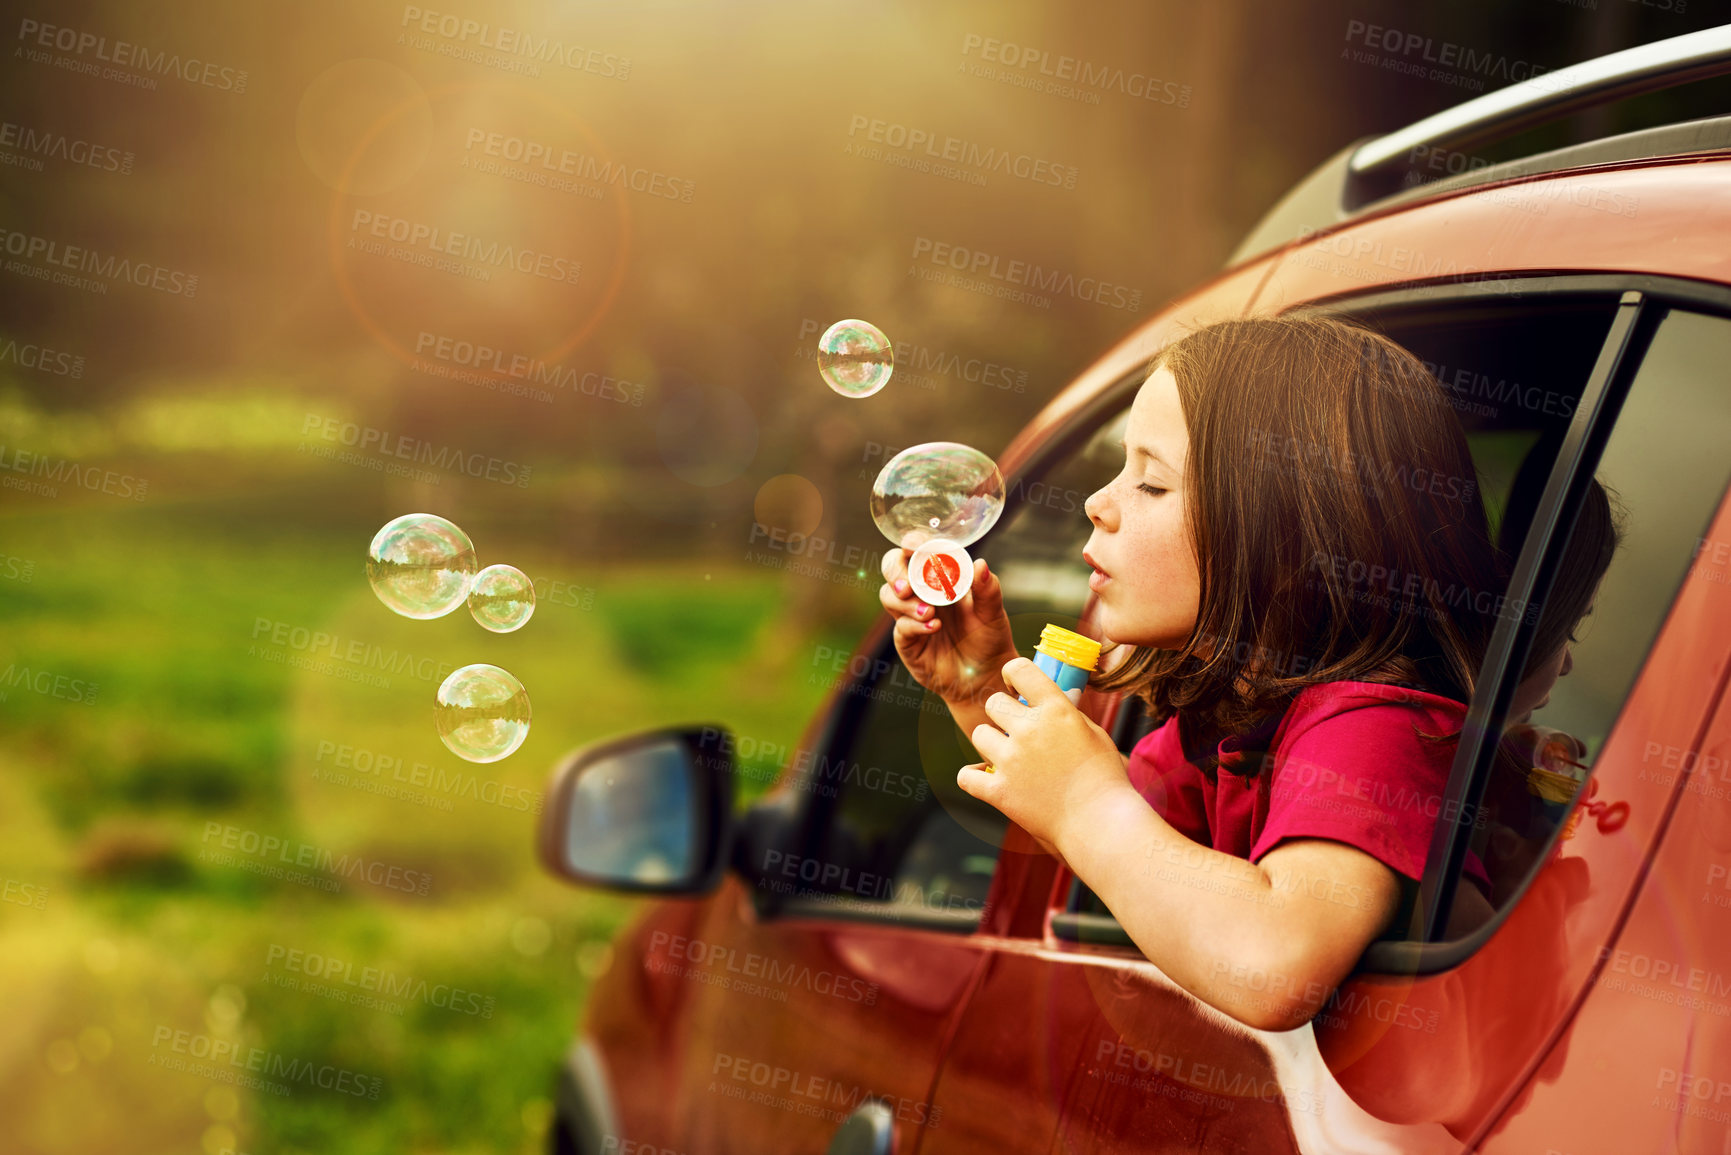 Buy stock photo Shot of a playful little girl blowing bubbles while leaning out of a car window